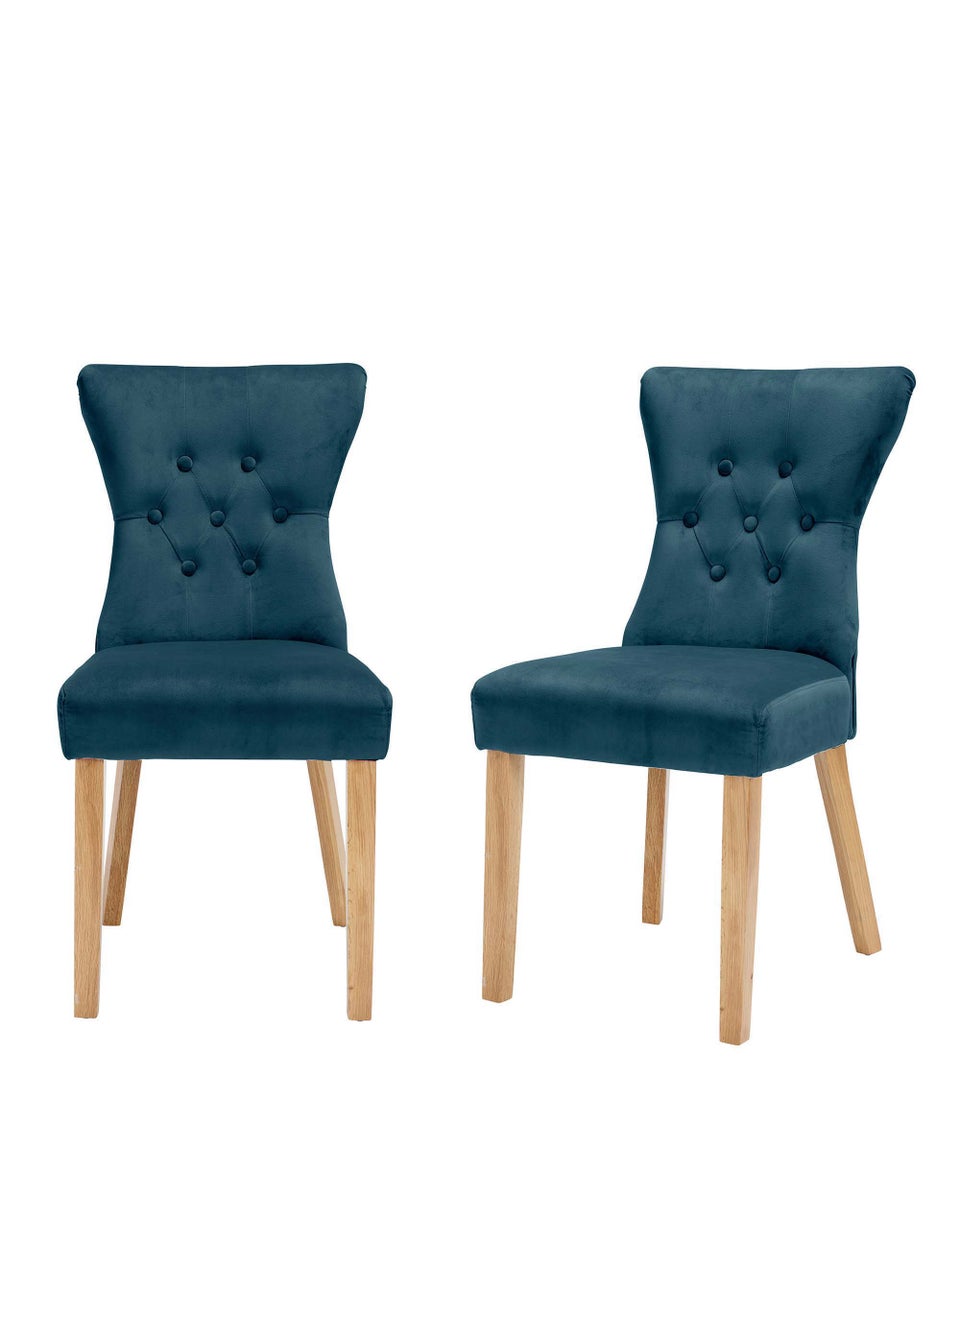 LPD Furniture Set of 2 Naples Dining Chairs Peacock Blue (920x630x460mm)